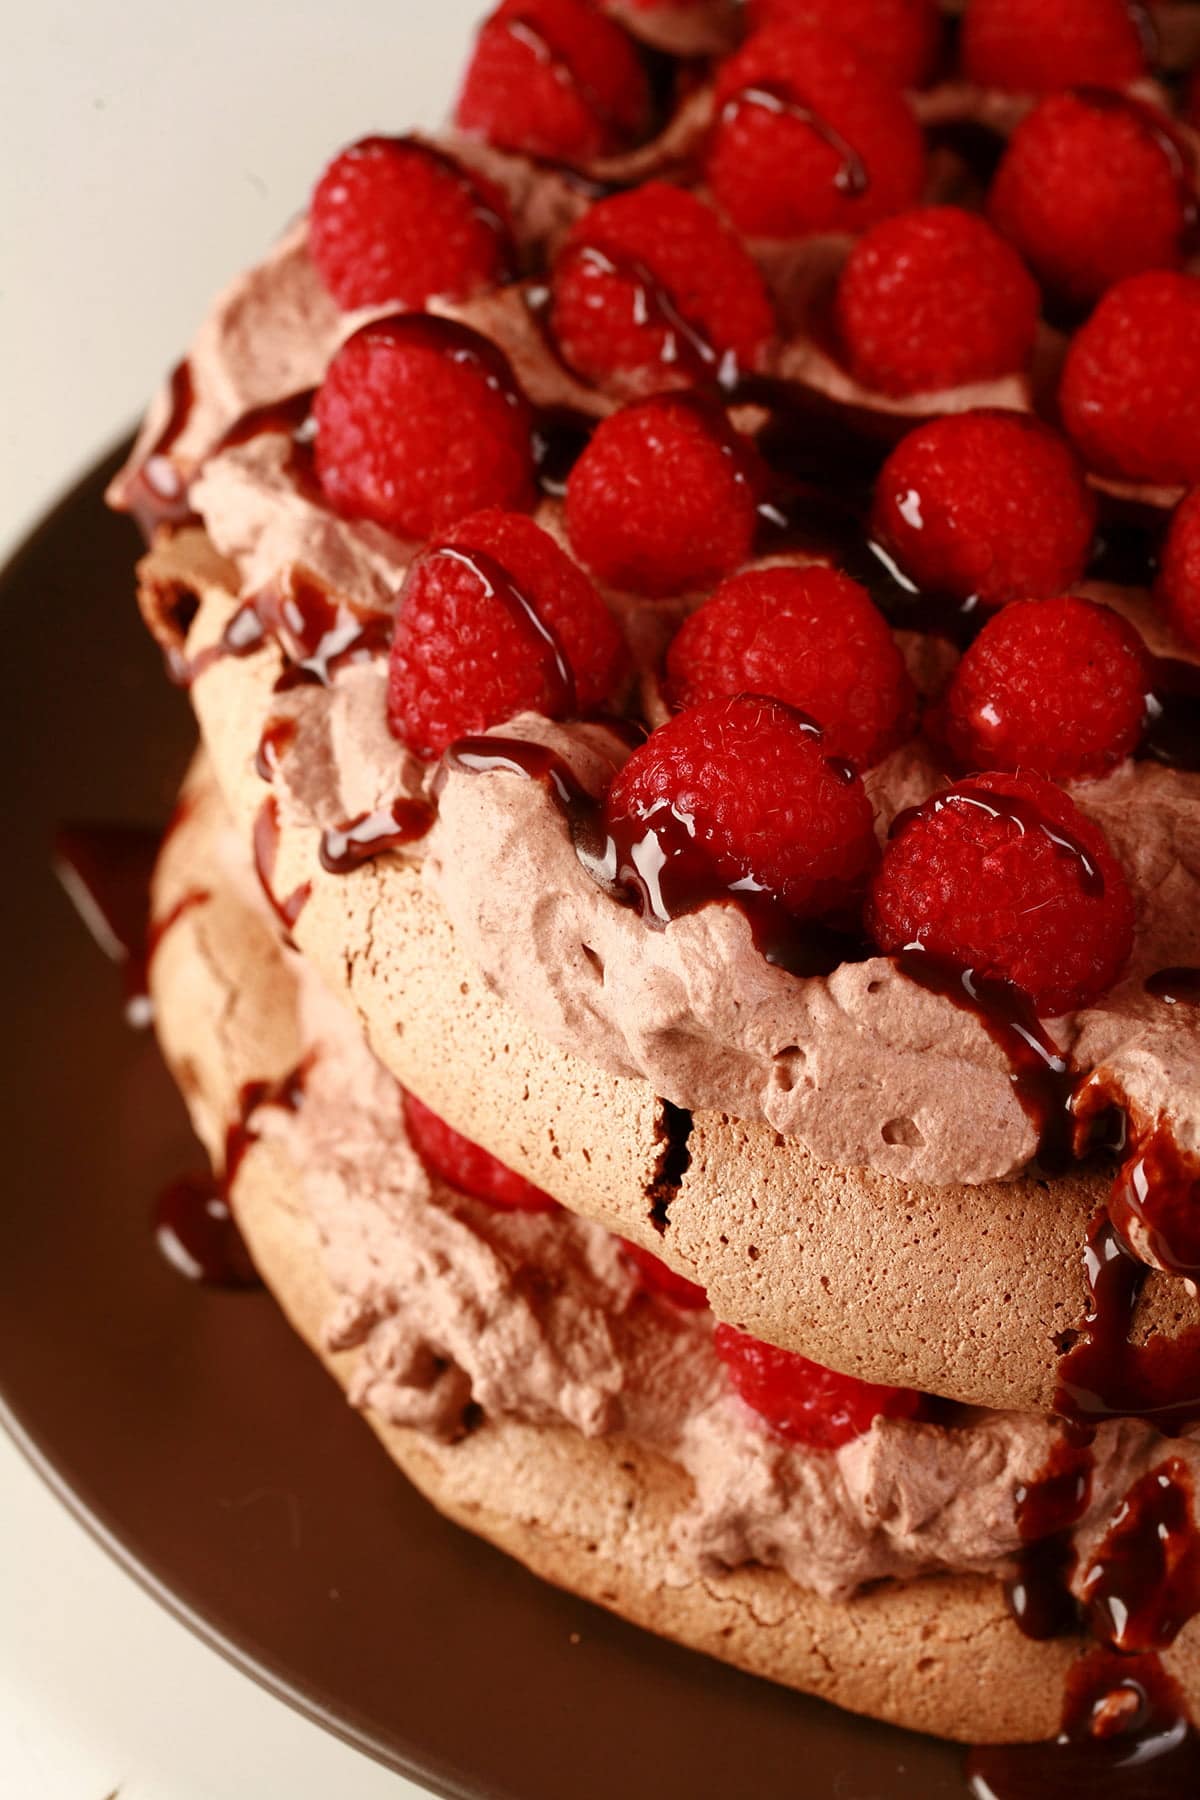 A double layered chocolate pavlova on a brown plate. Two layers of chocolate meringue are sandwiches with layers of chocolate whipped cream and raspberries, drizzled with chocolate sauce.